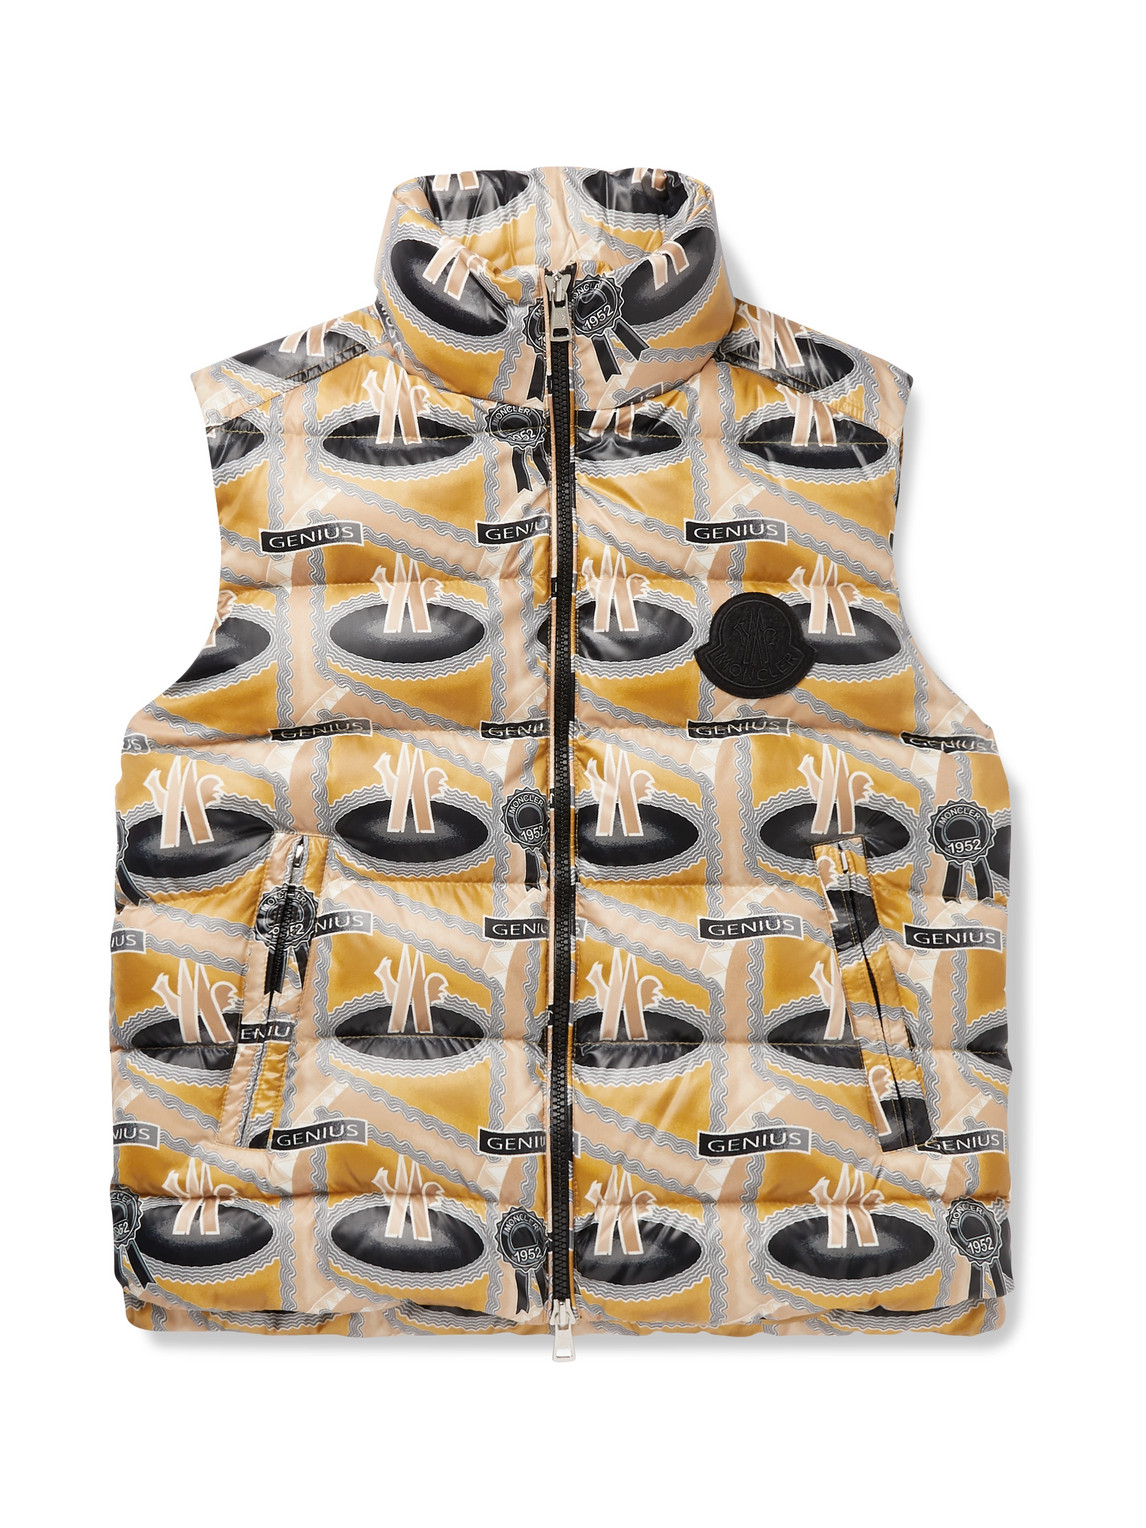 MONCLER GENIUS FERGUS PURCELL 2 MONCLER 1952 PARKER PRINTED QUILTED NYLON DOWN GILET